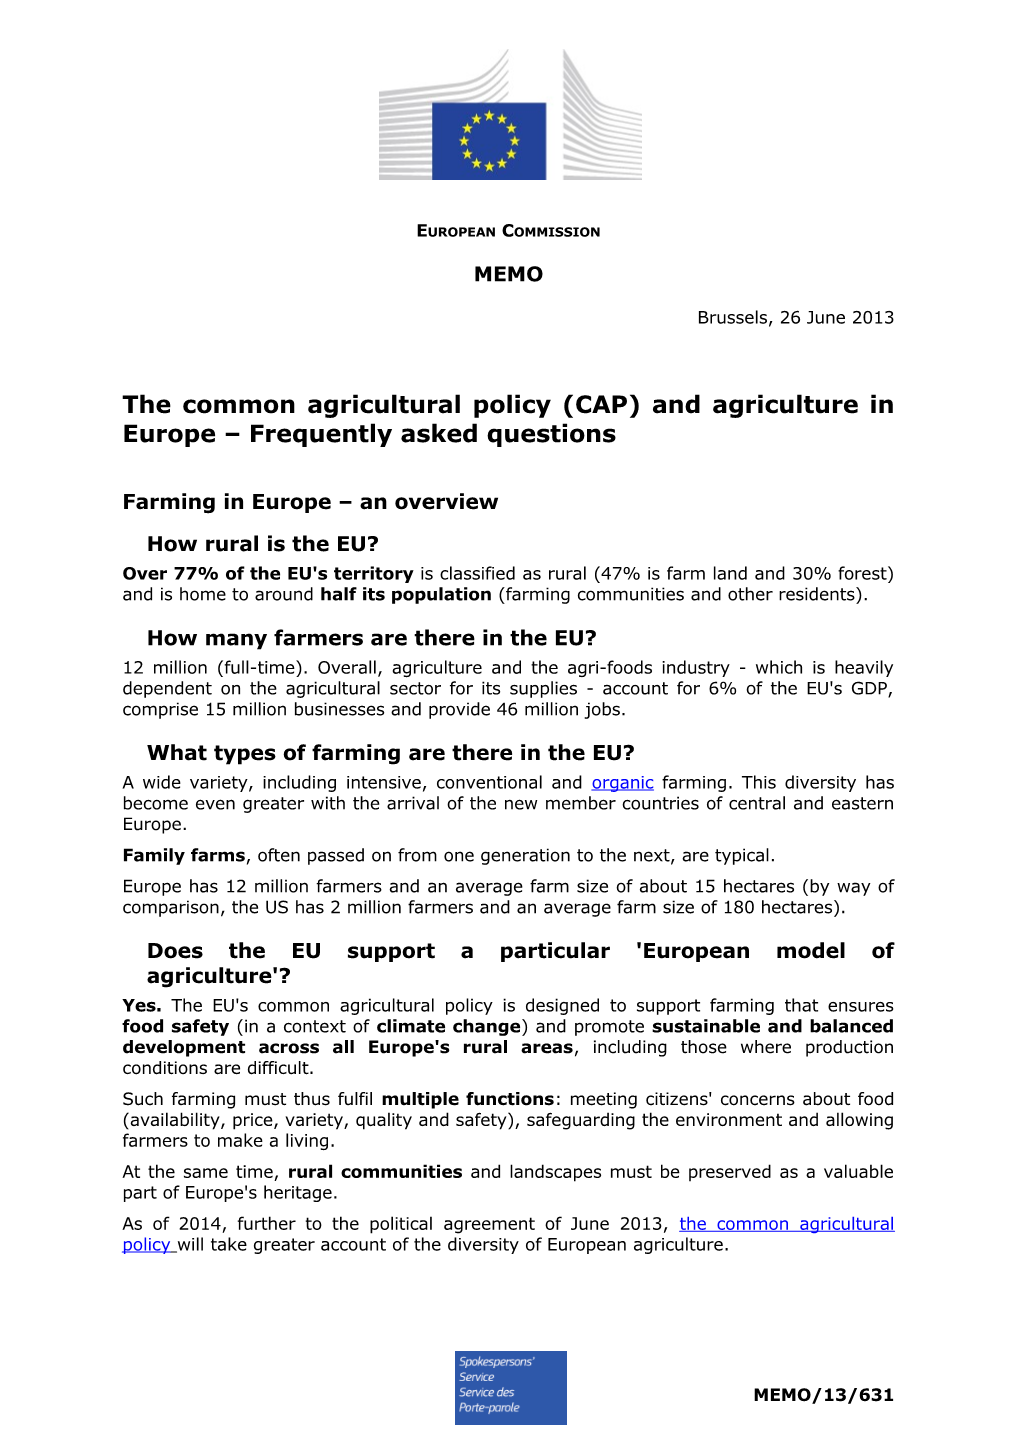 The Common Agricultural Policy (CAP) and Agriculture in Europe Frequently Asked Questions